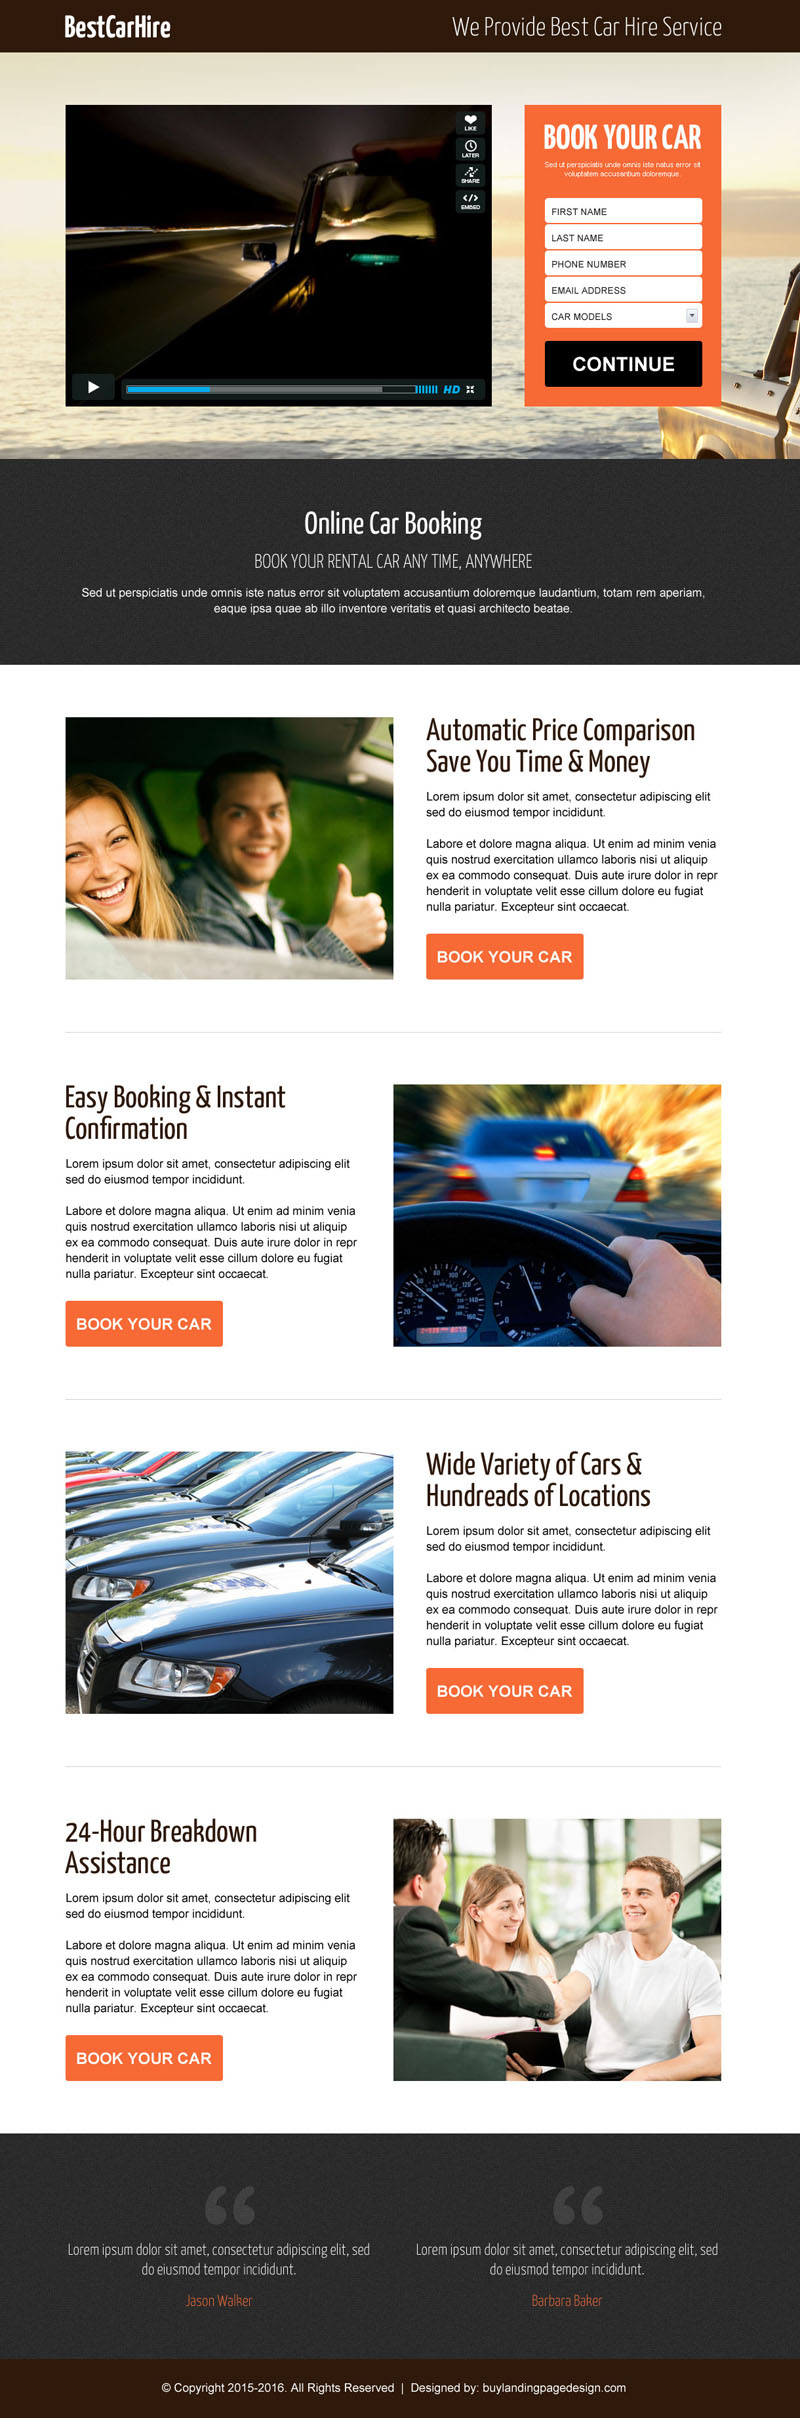 car-hire-video-landing-page-design-template-to-capture-car-hire-leads-012